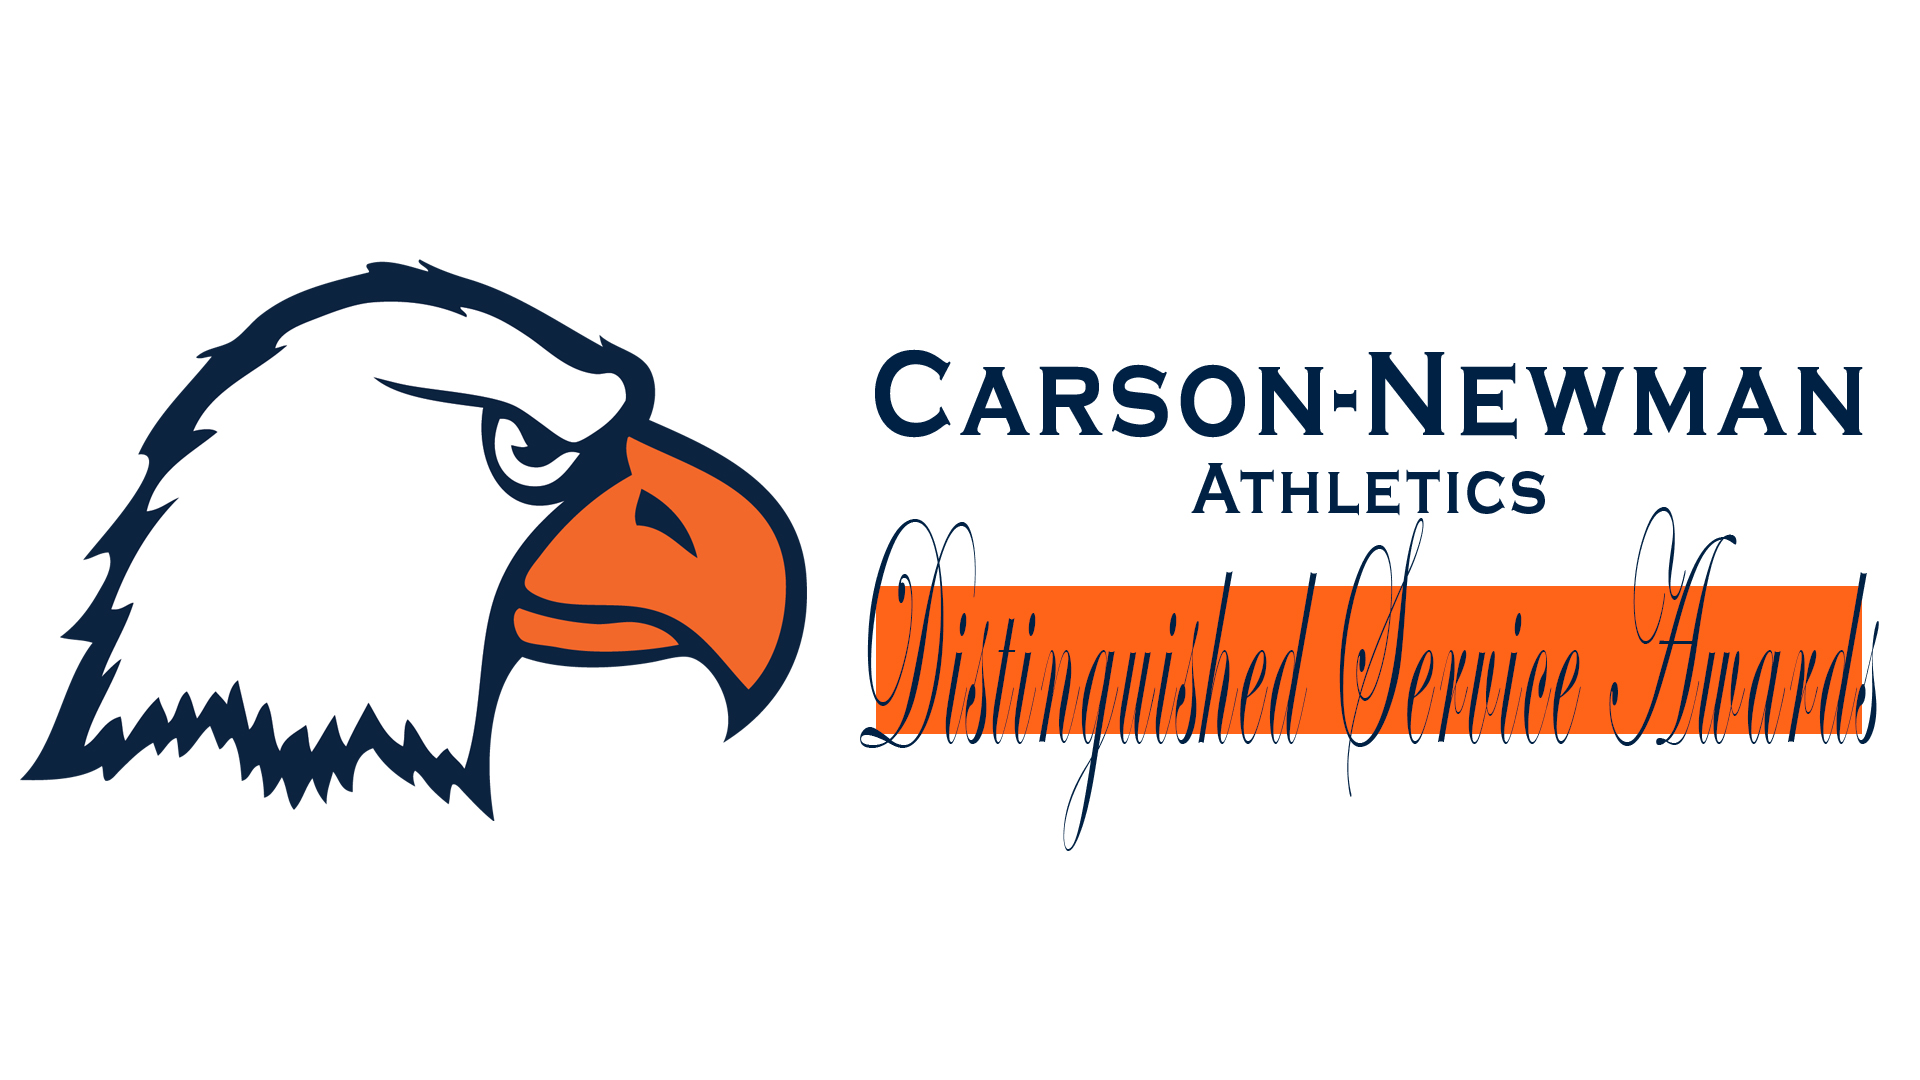 C-N athletics issues call for nominations for distinguished service awards